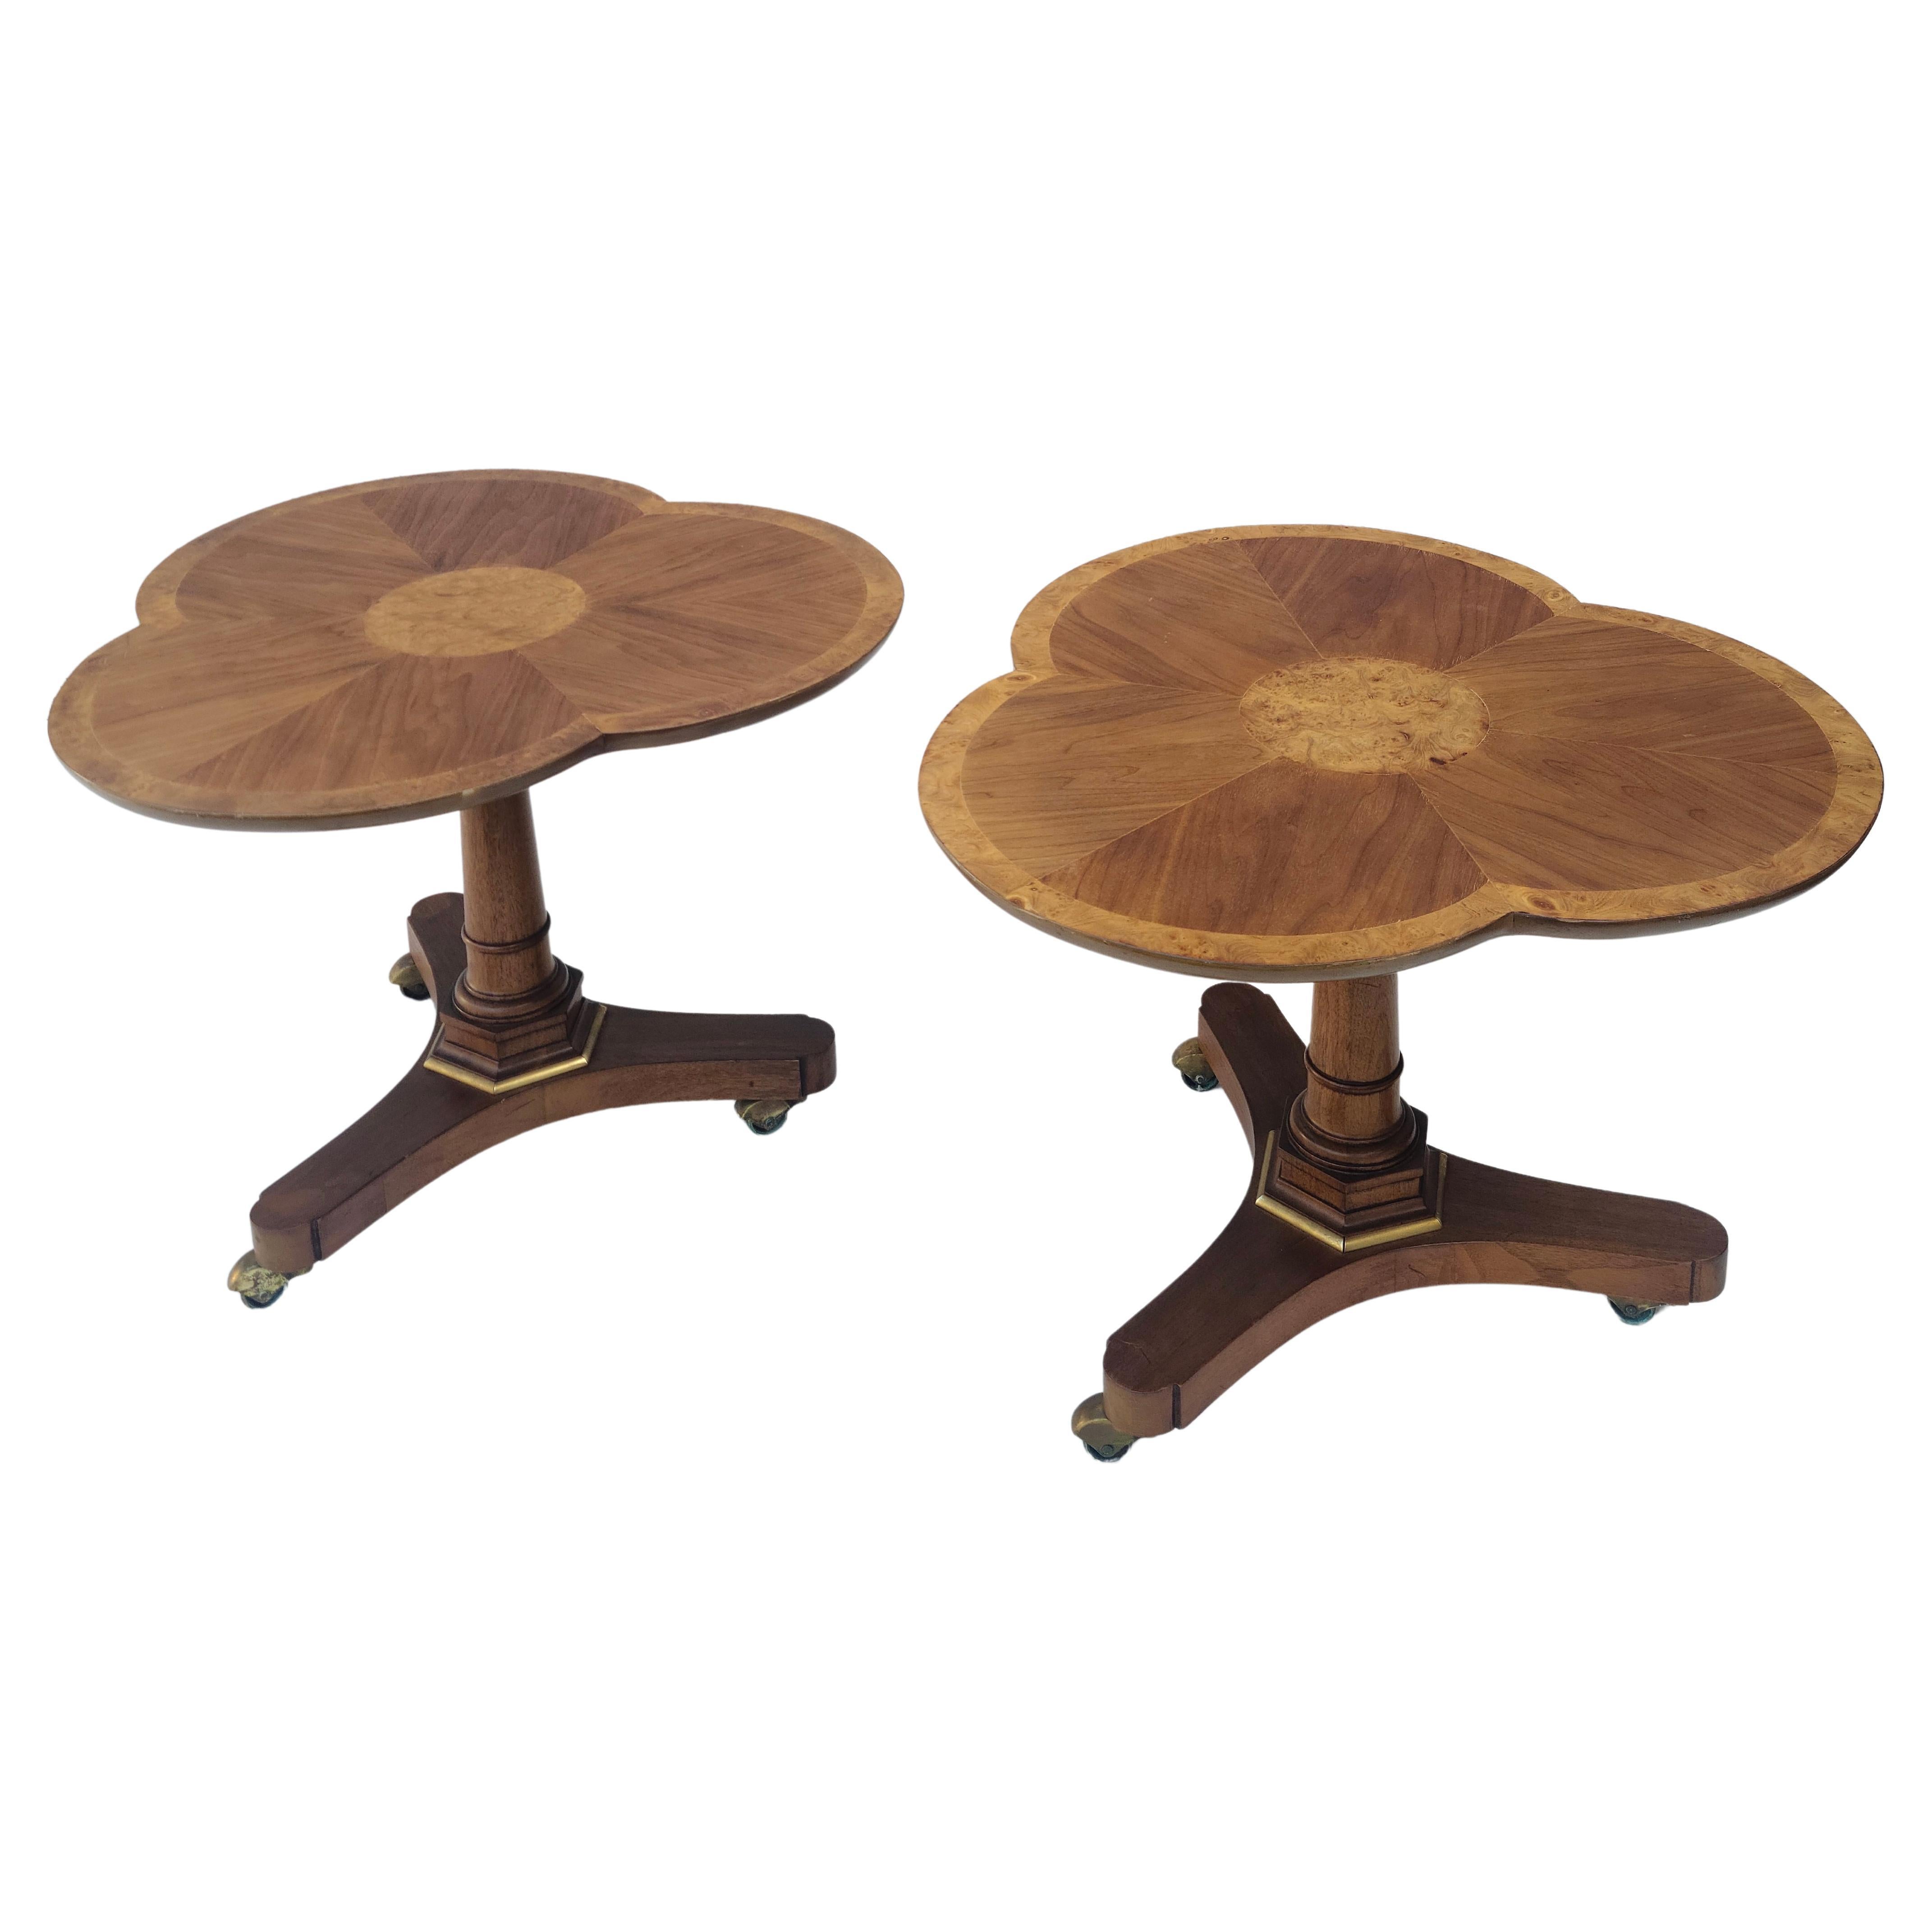 Please feel free to reach out for accurate shipping quote.

Pair gueridon tables. Wanlut with walnut burl on brass casters.

Flower pattern top is somewhat an irony on a gueridon=battle table.